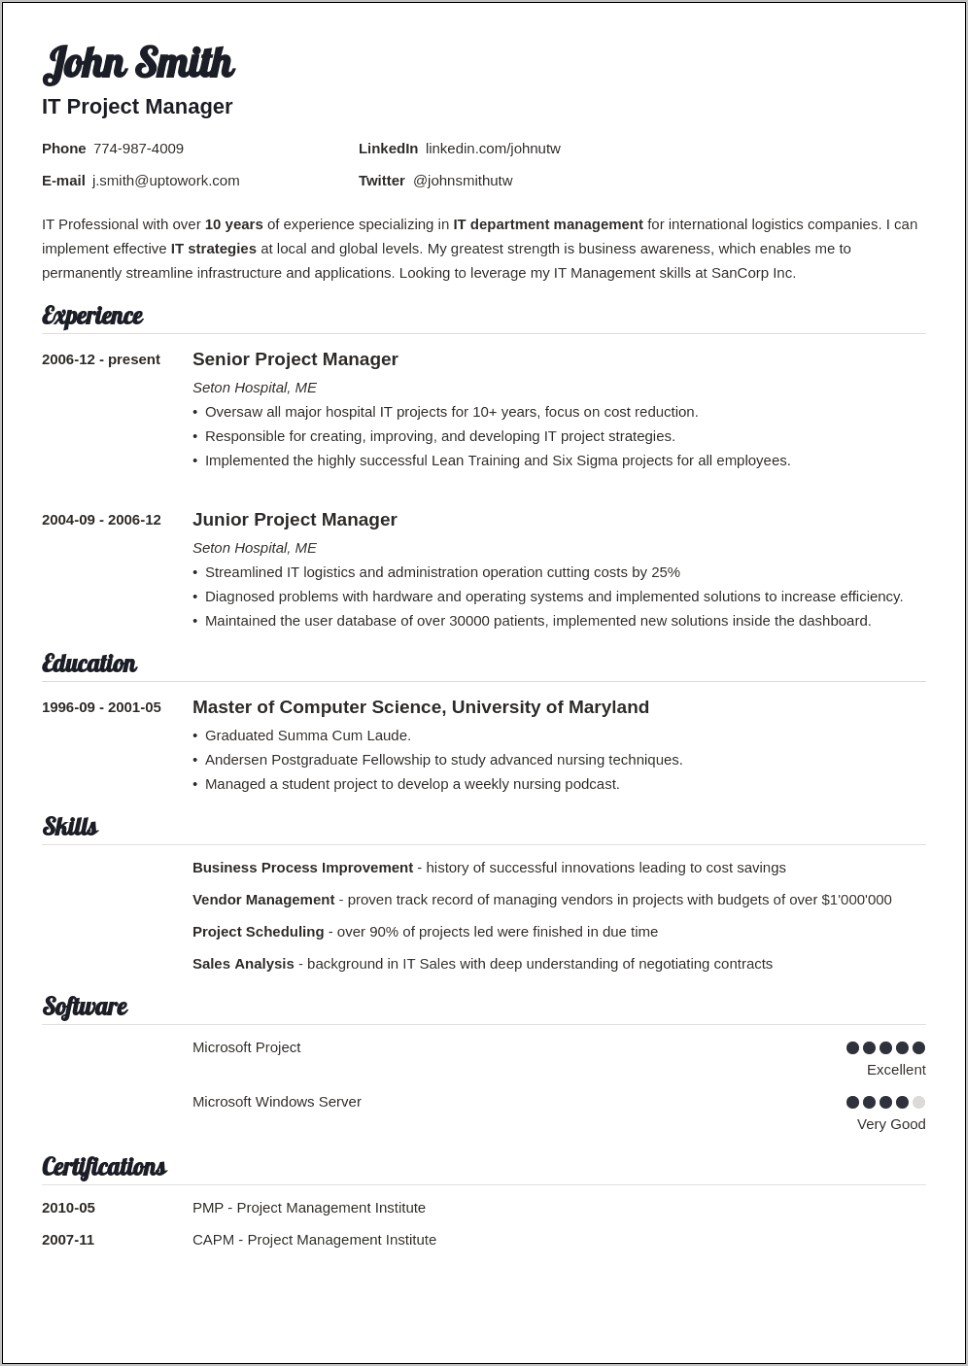 Samples Of Professionally Written Resumes